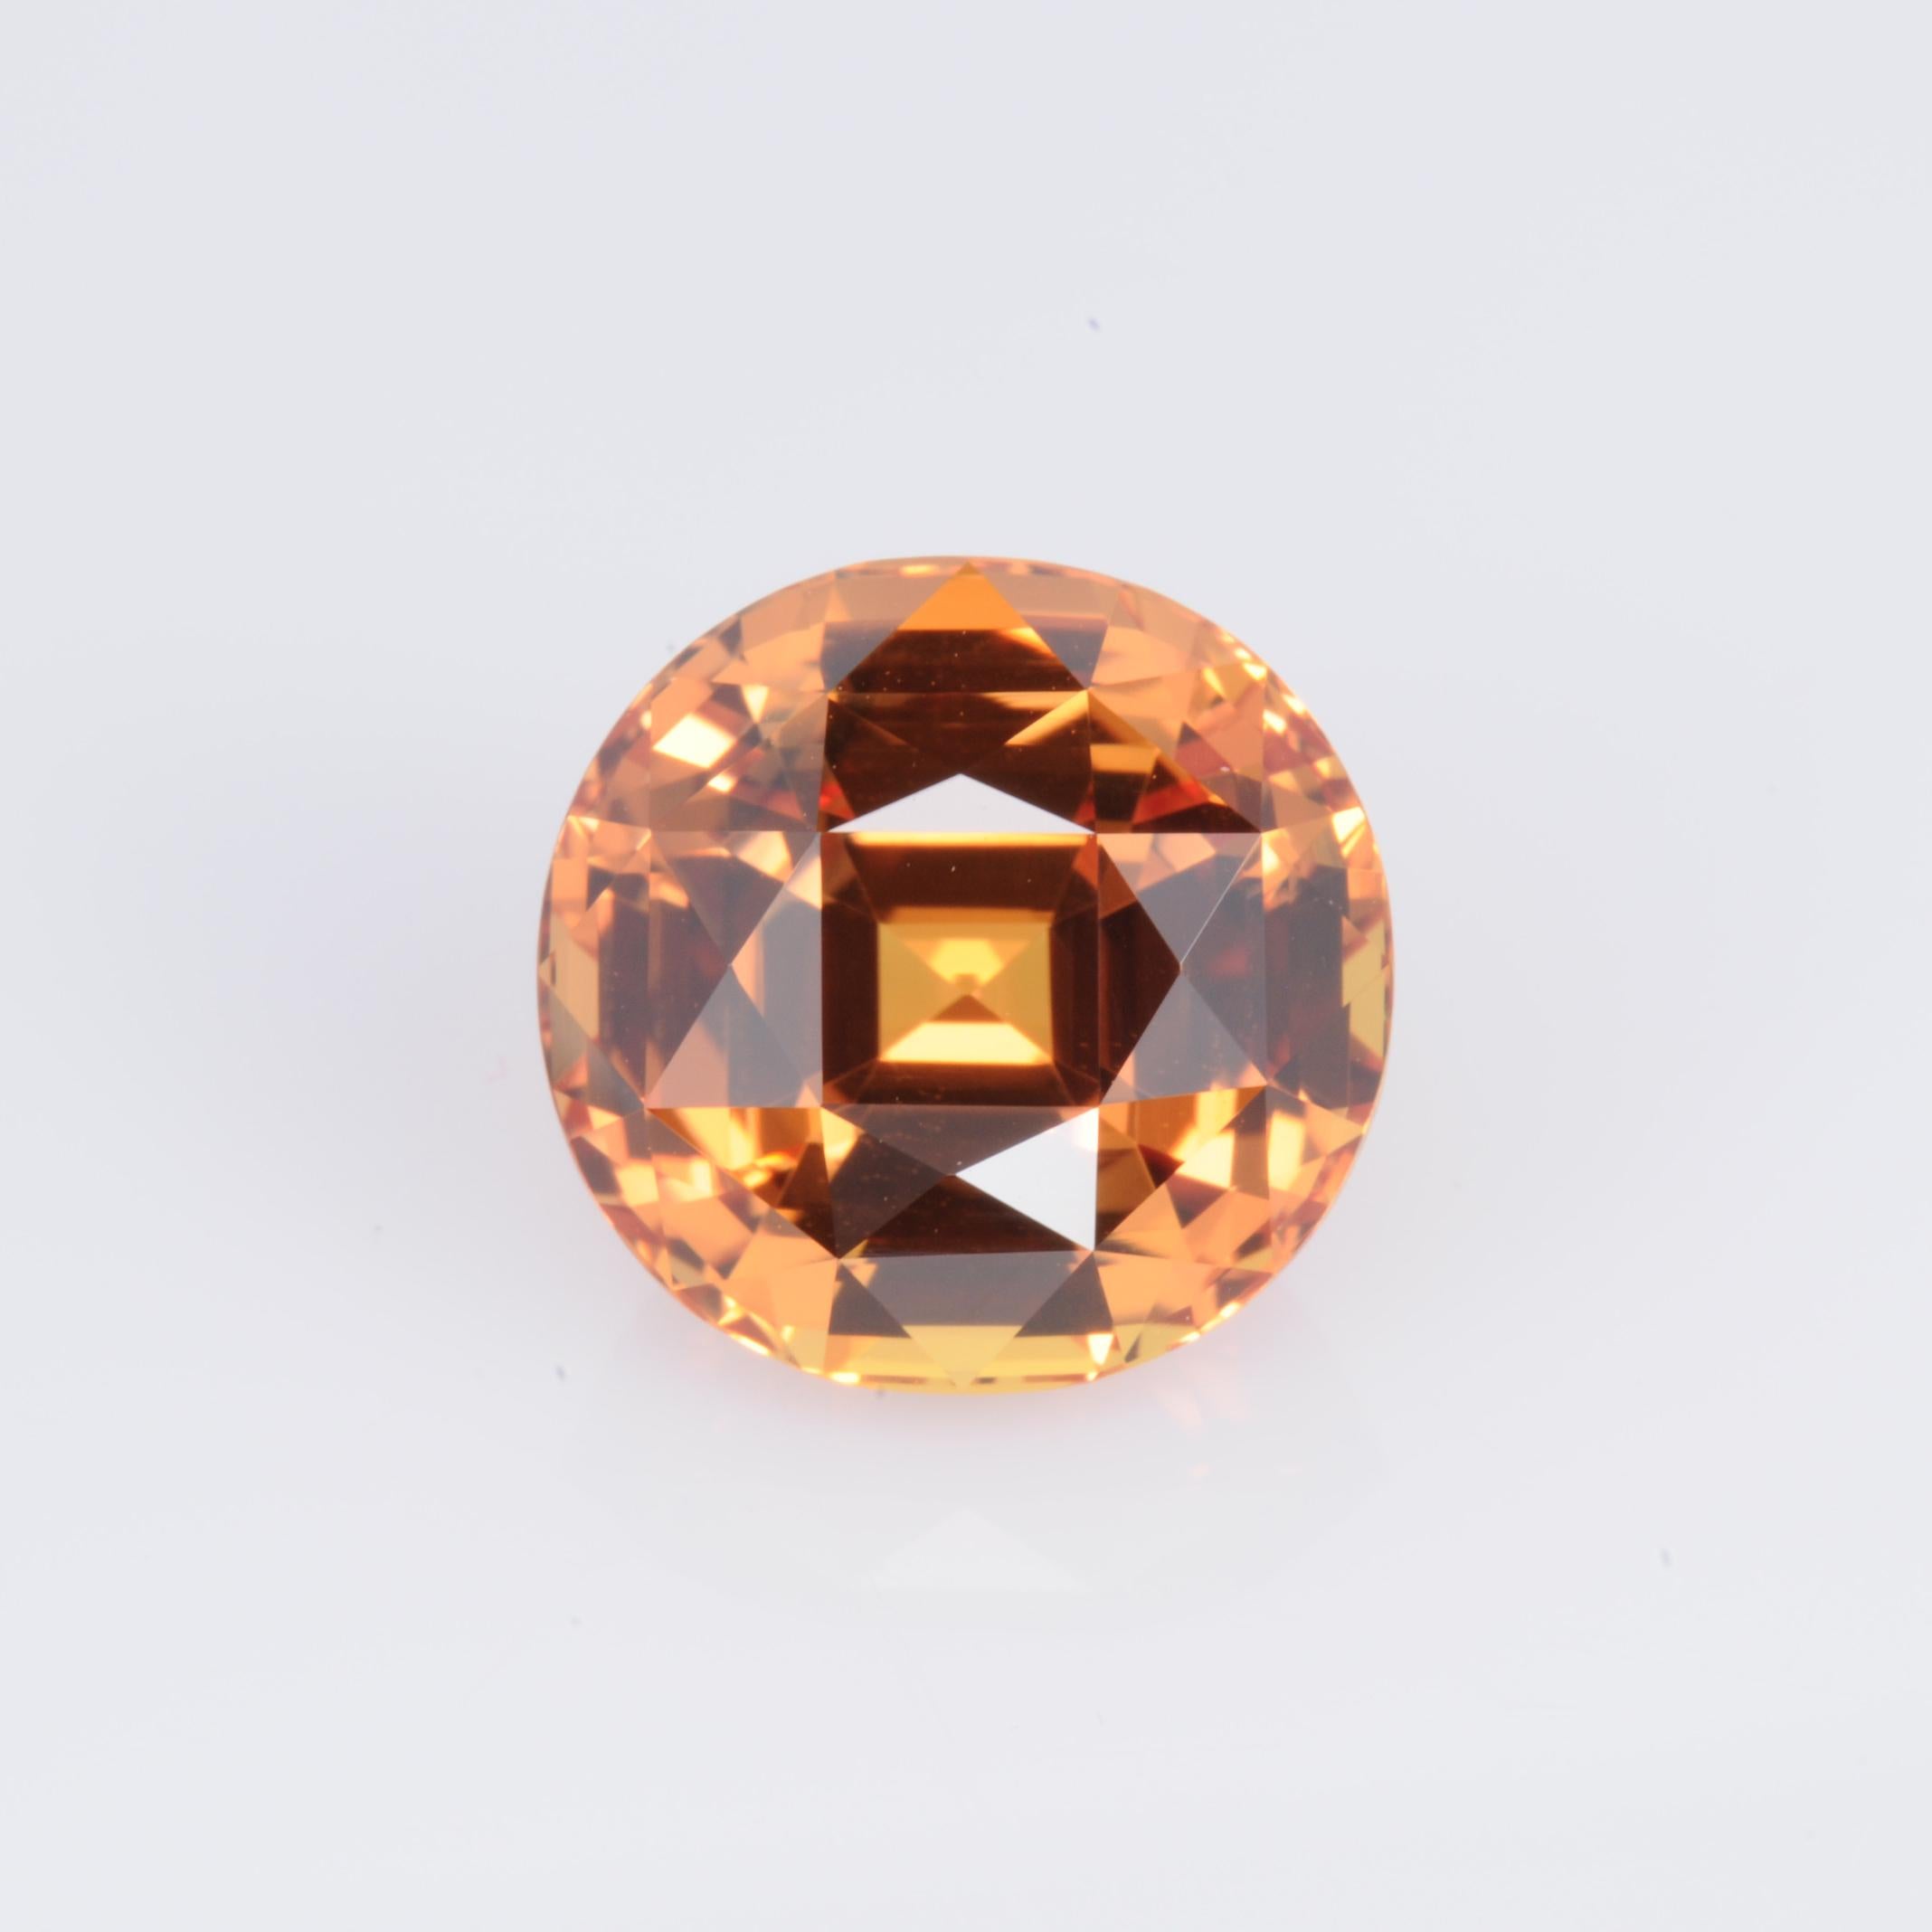 Rare and exceptional 8.10 carat unheated orange Sapphire round gem, offered loose to an avid gem collector.
The G.I.A. gem certificate is attached to the images for your reference.
Returns are accepted and paid by us within 7 days of delivery.
We